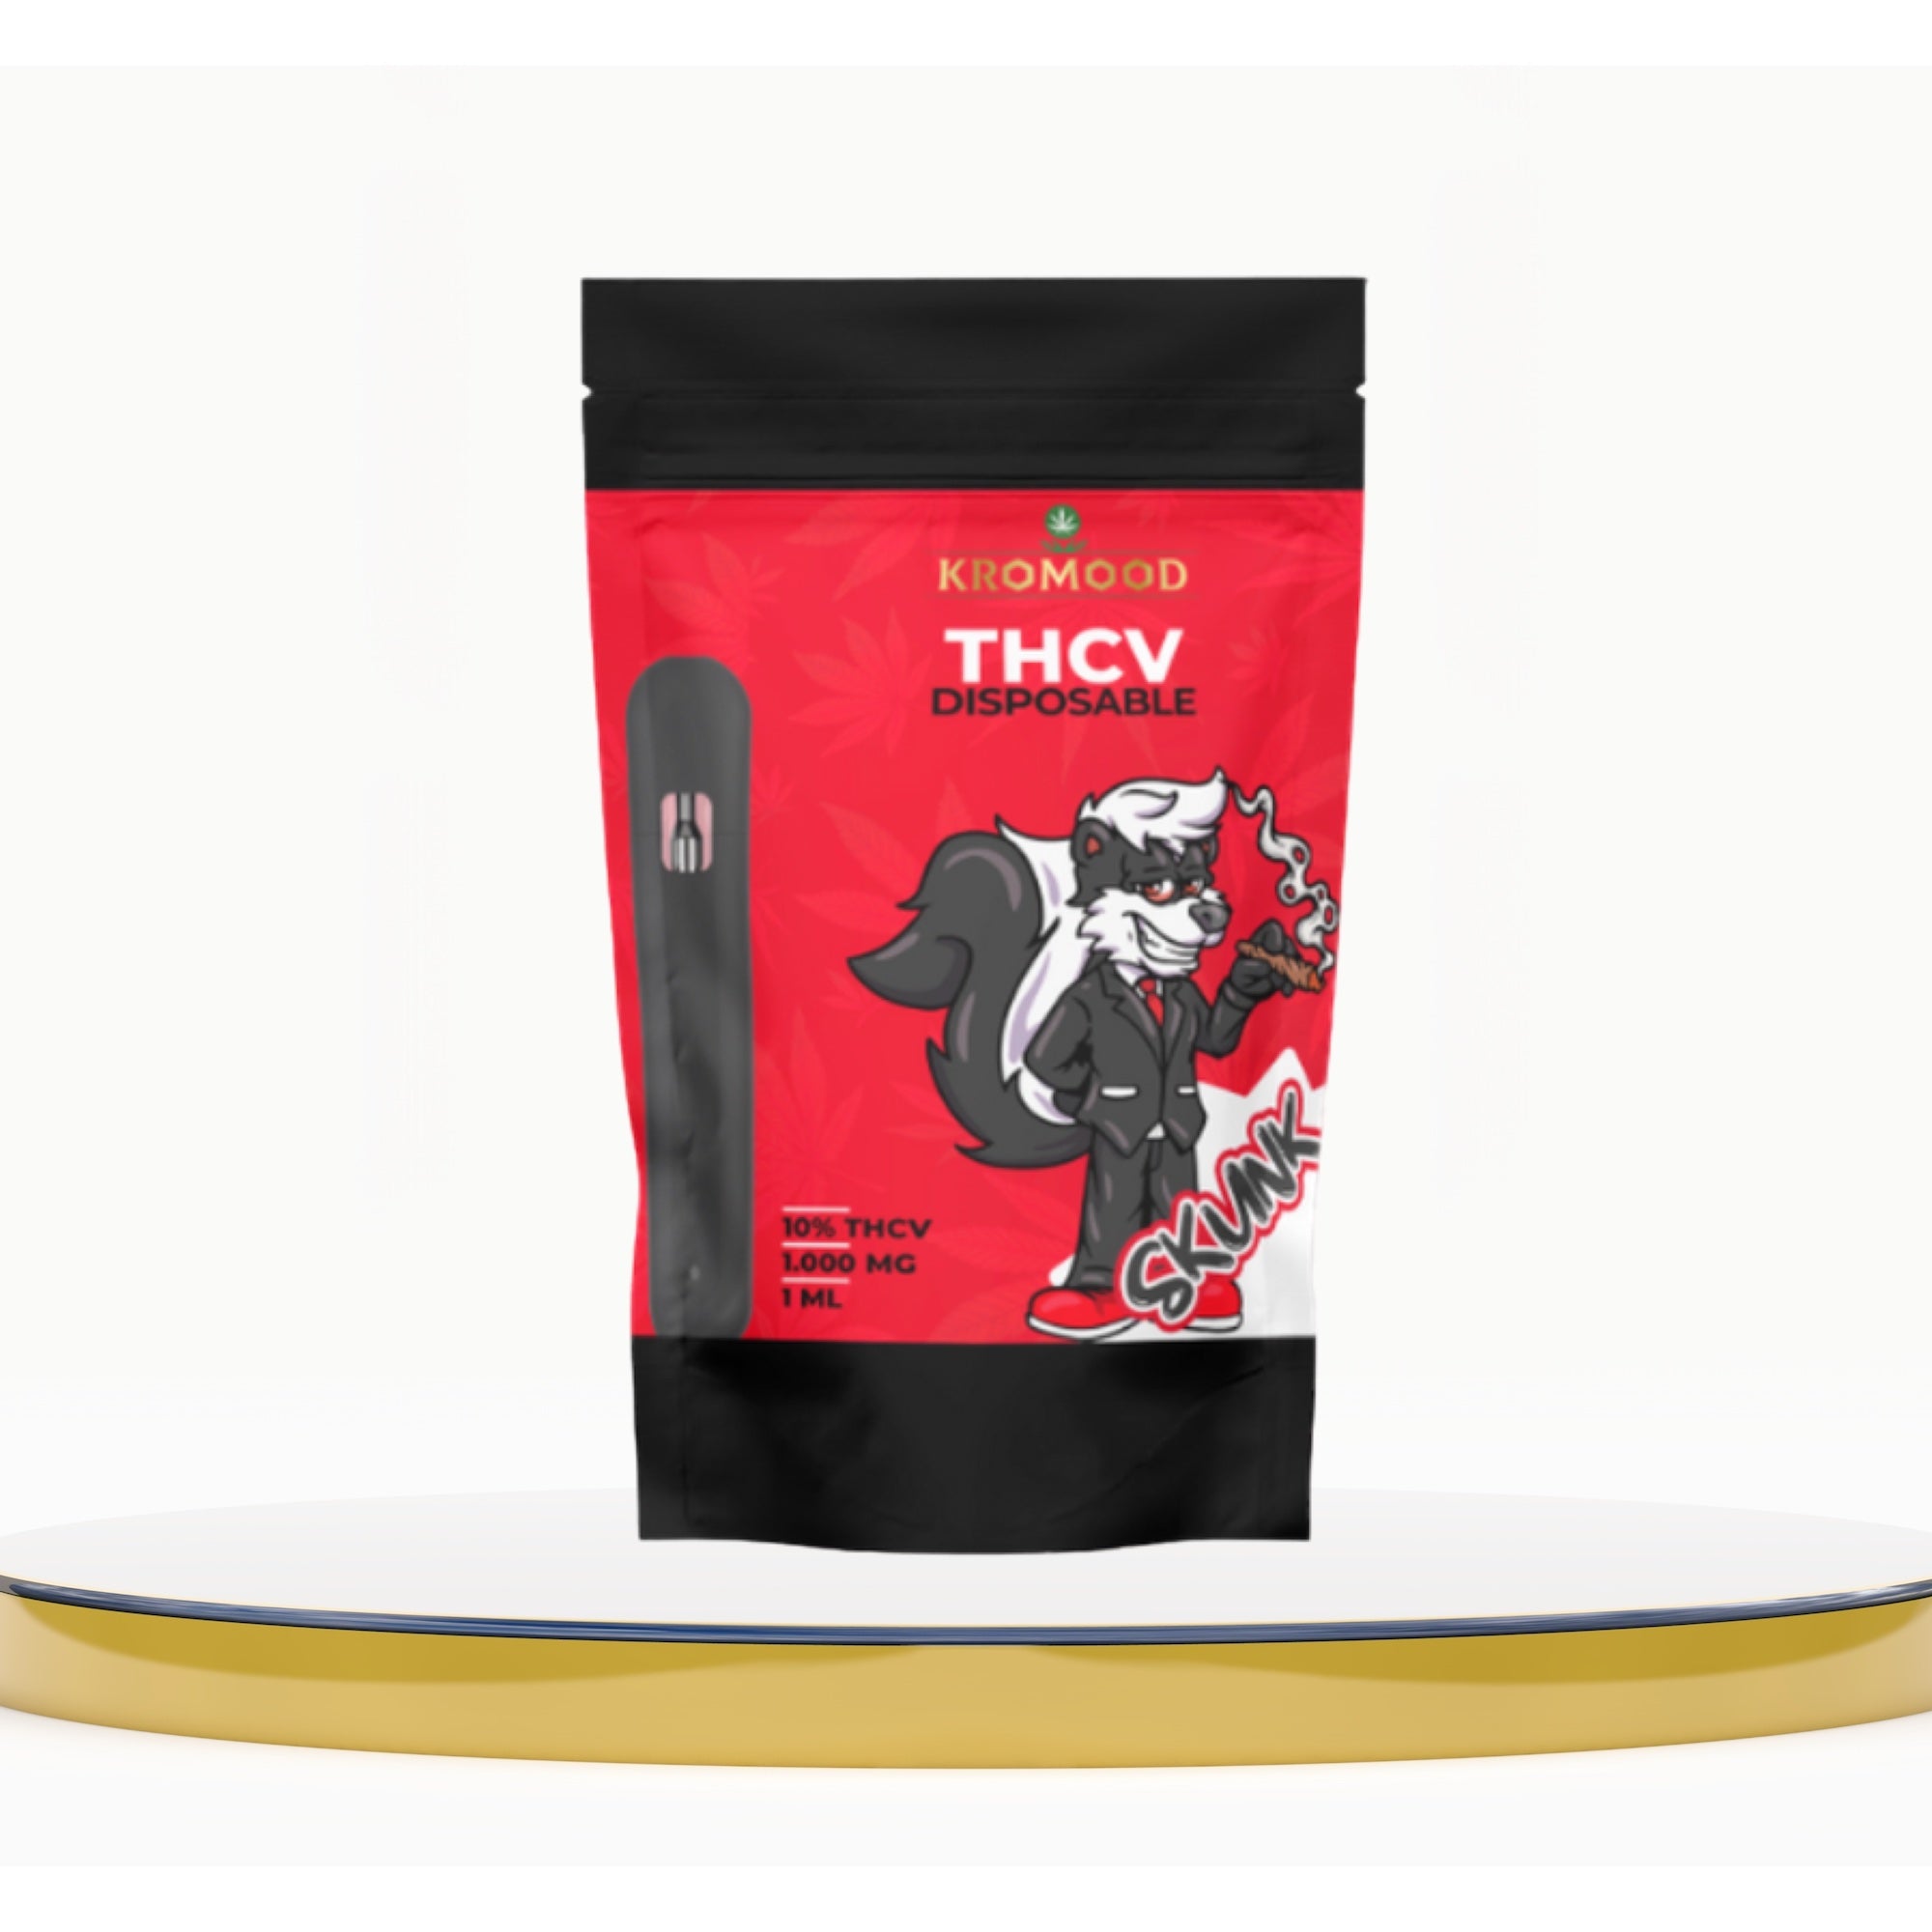 KroMood THCV Disposable Puff - Skunk: The Art of Sublimated Vaping, 10% THCV/1ML, 600 Puffs, CCELL Puff Technology 